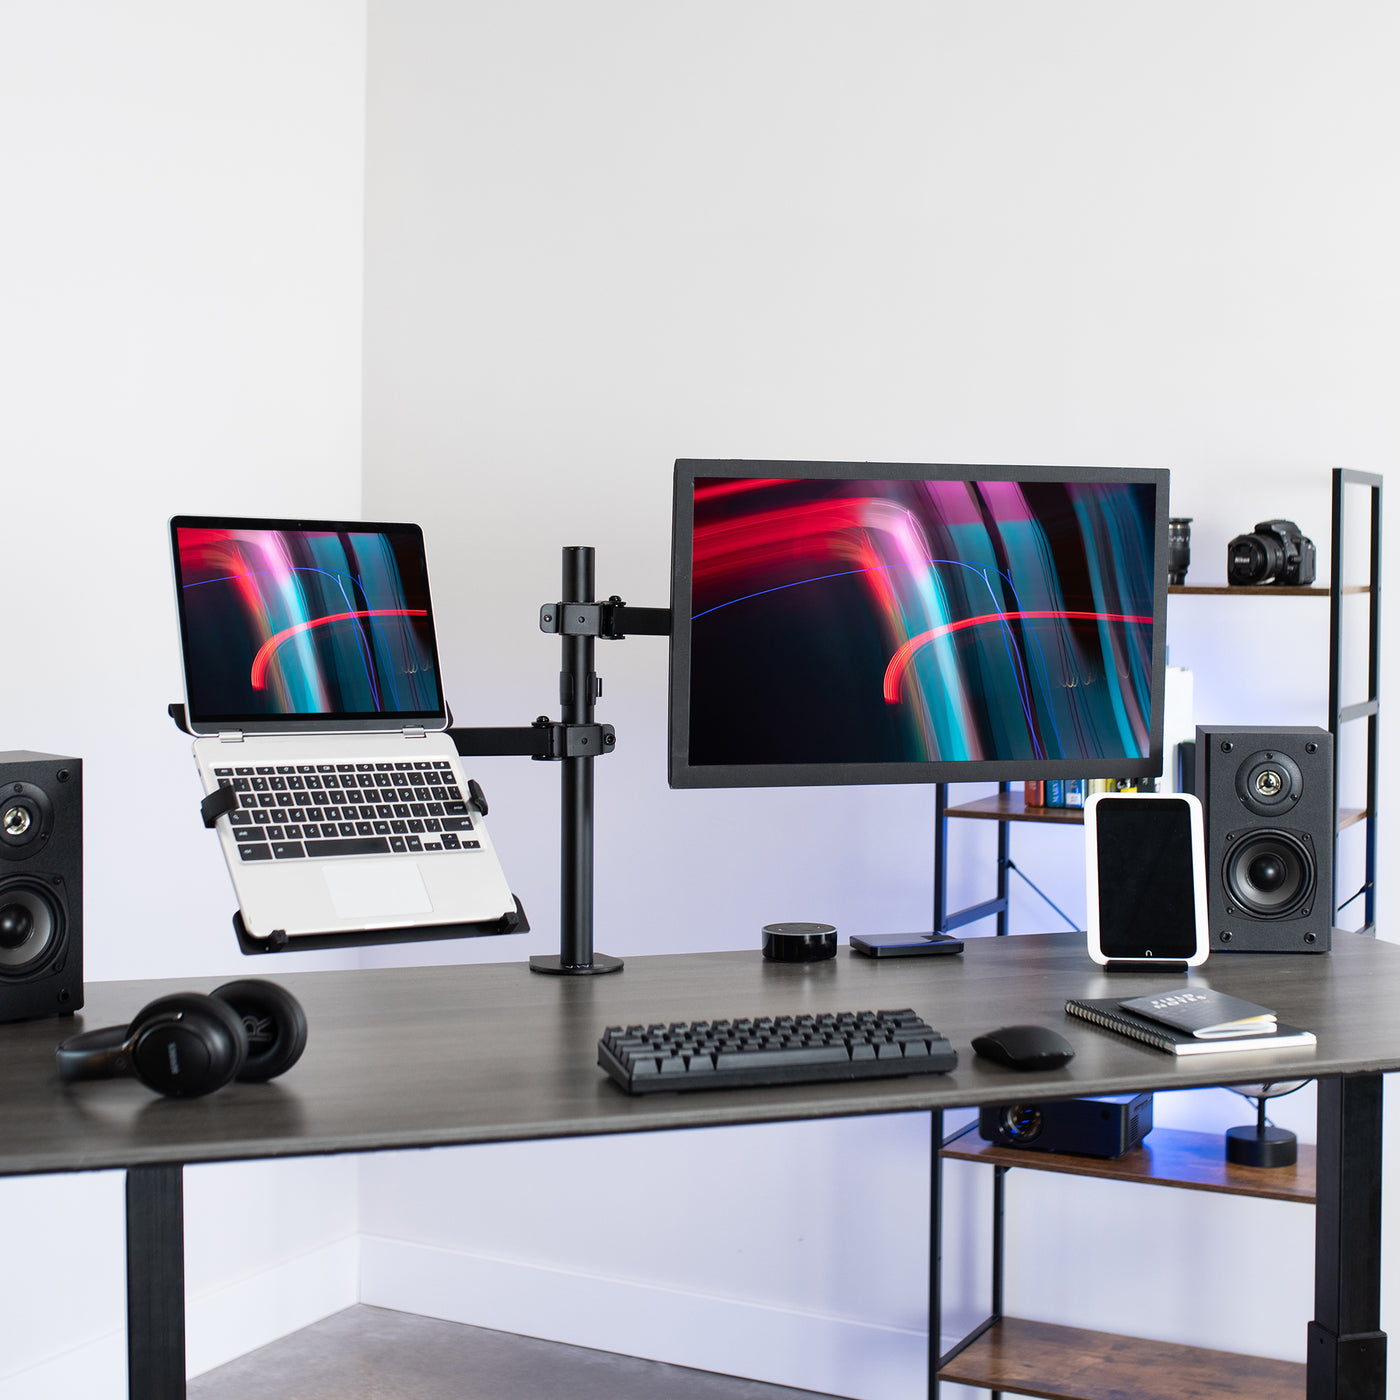 Single Monitor and Laptop Desk Mount